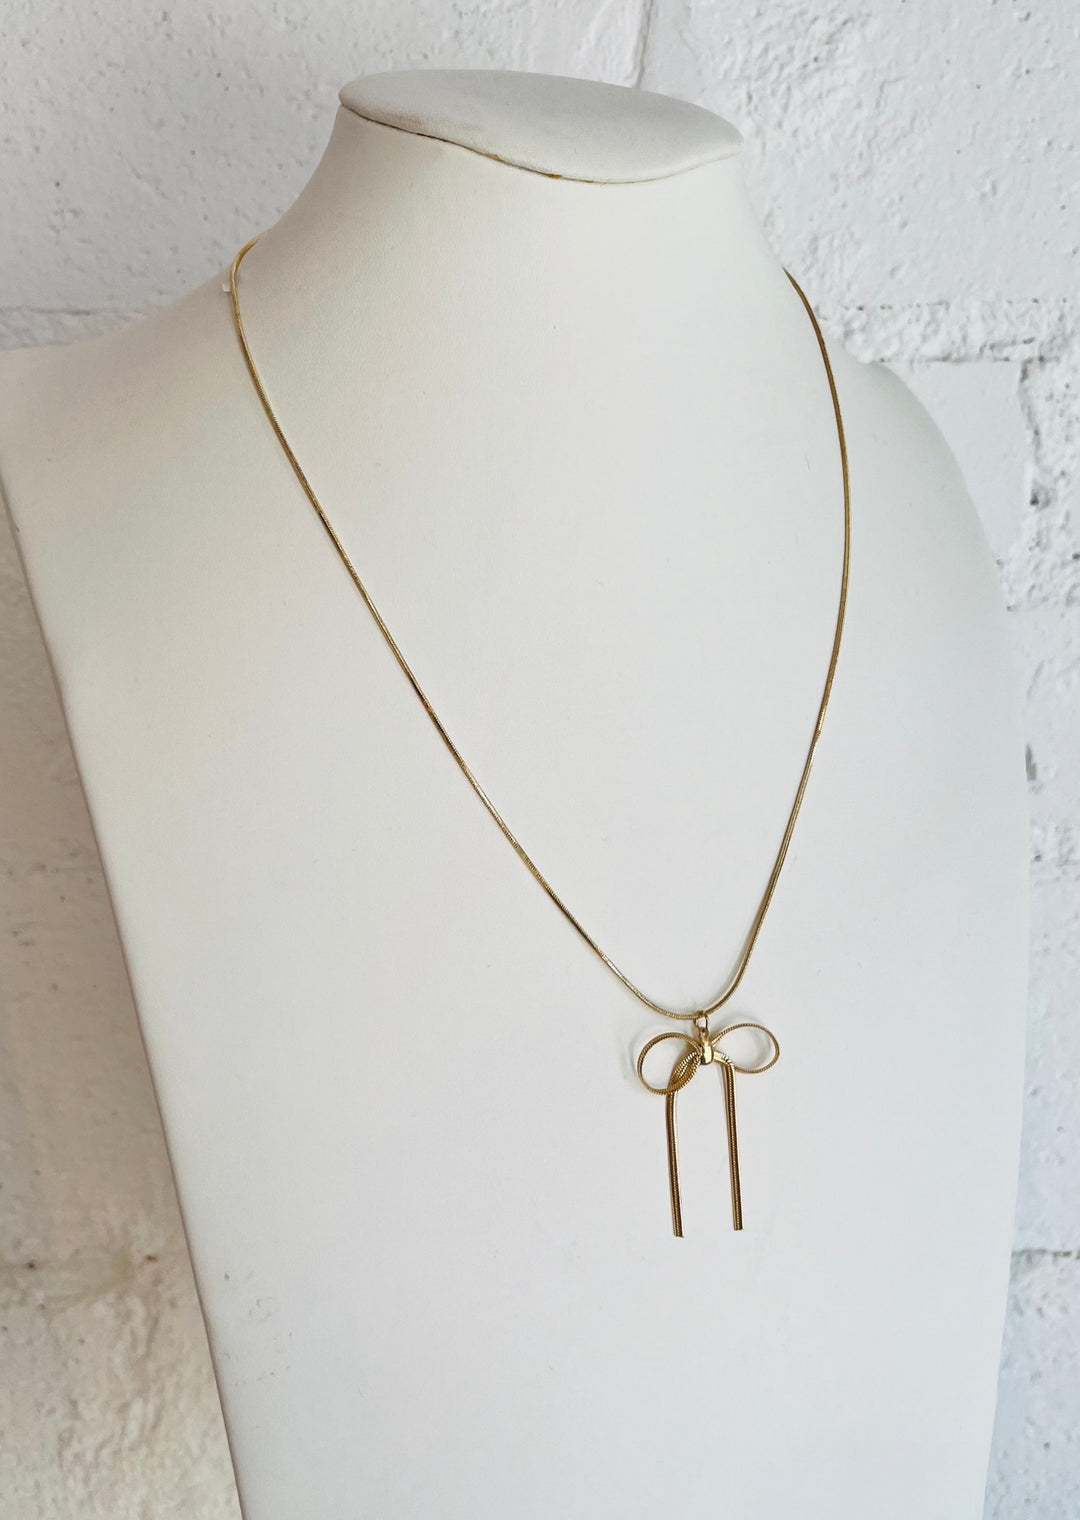 Magic Bow Necklace, Jewelry, Adeline, Adeline, dallas boutique, dallas texas, texas boutique, women's boutique dallas, adeline boutique, dallas boutique, trendy boutique, affordable boutique